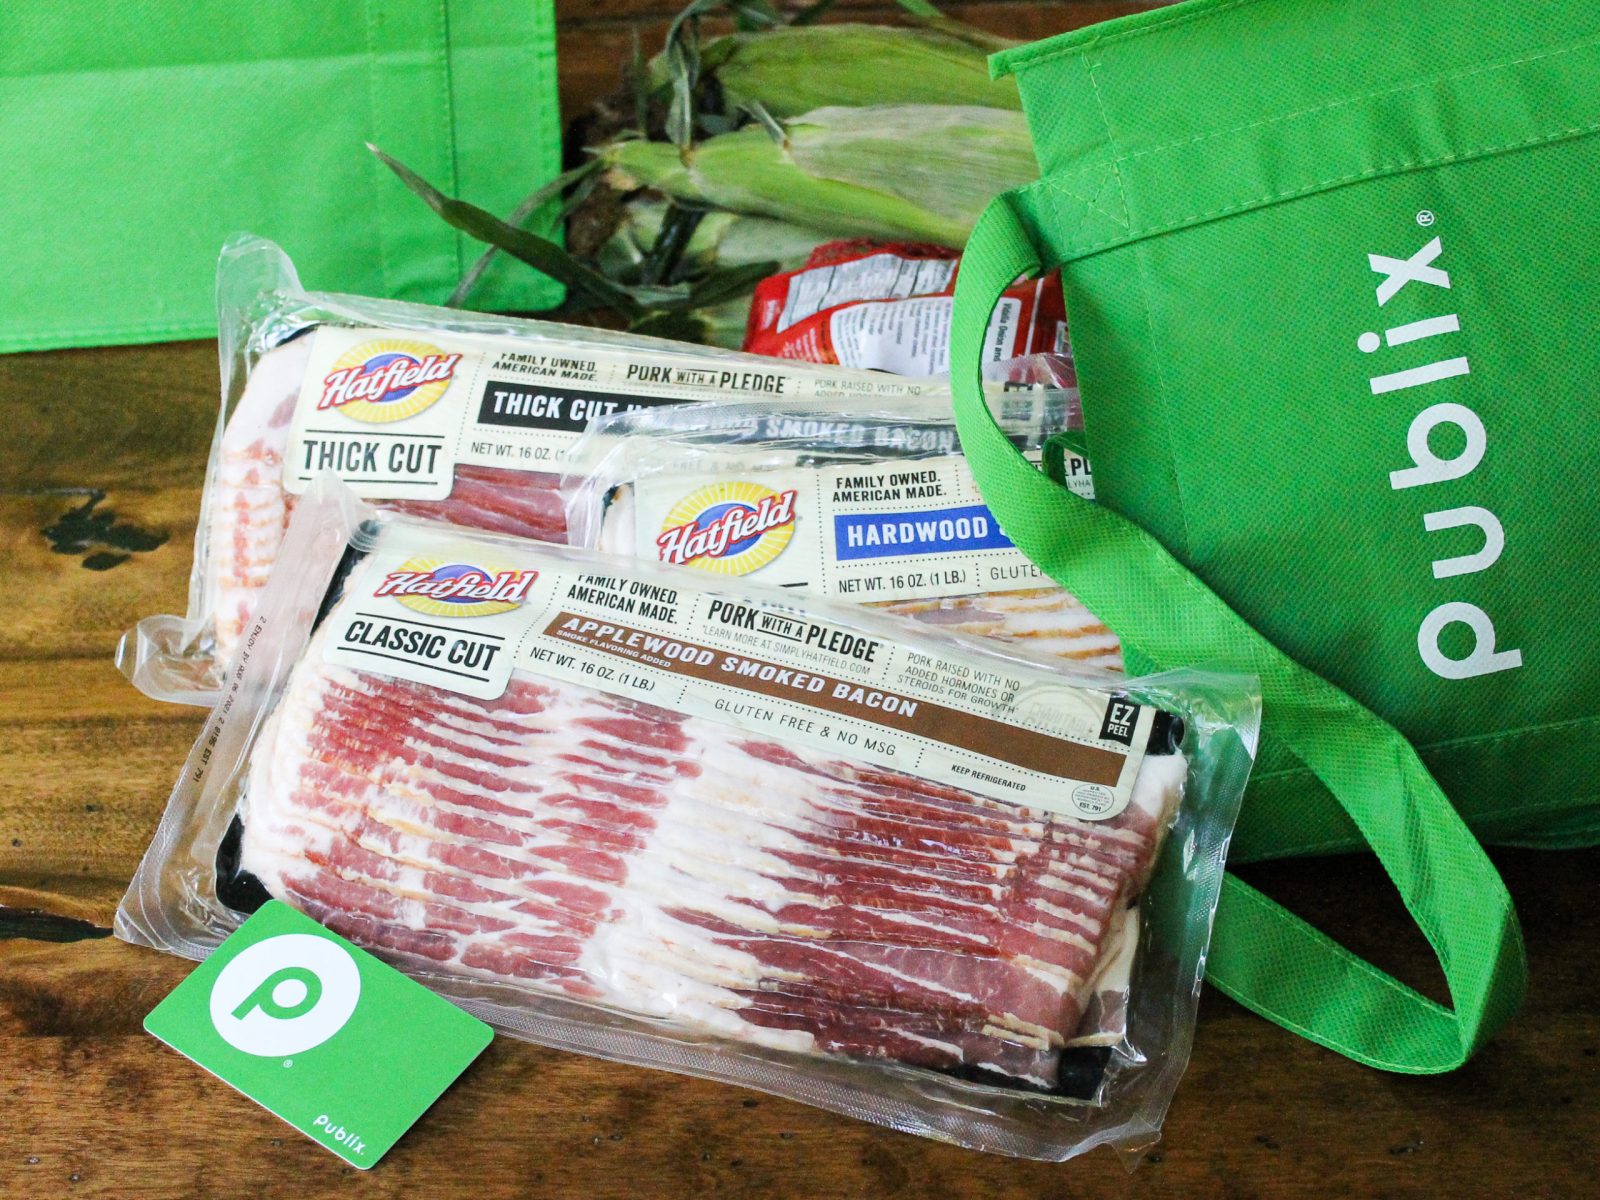 Delicious Hatfield Bacon Is Now Available At Publix (Last Chance To Enter For The Chance To Try It For FREE!)